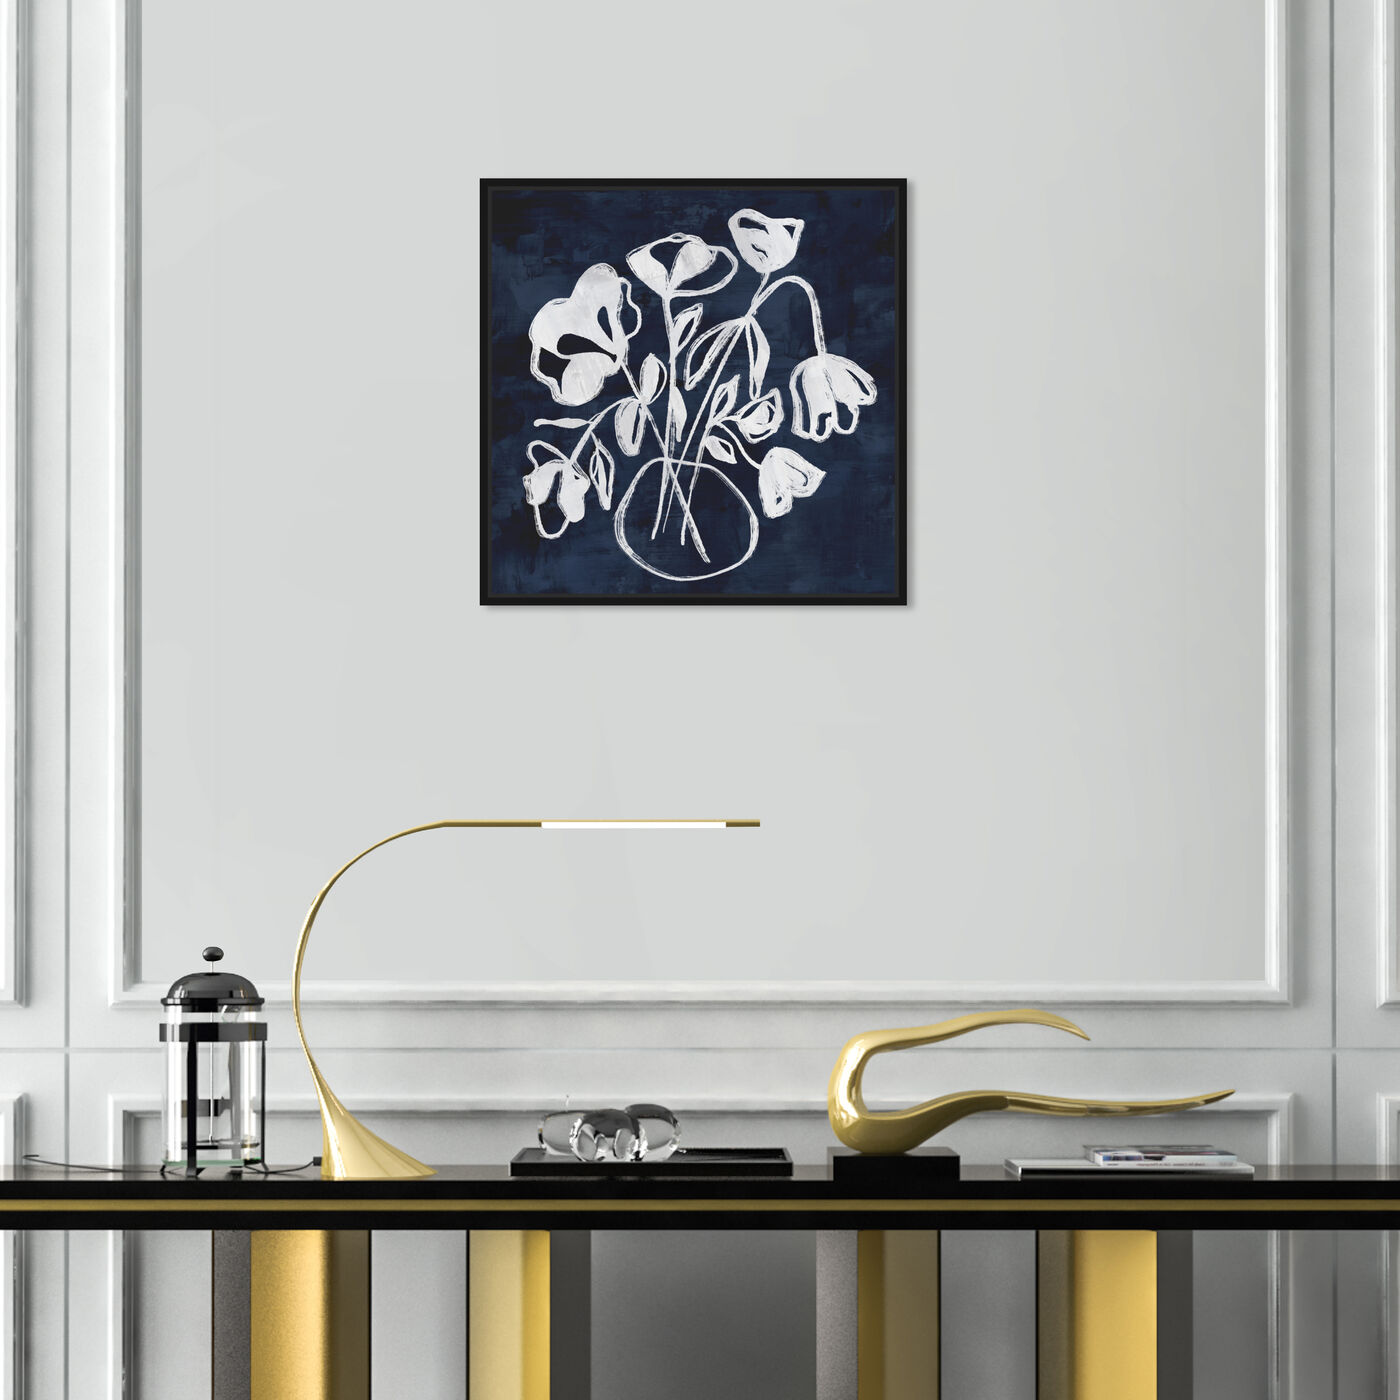 Hanging view of Floral Vase II featuring floral and botanical and florals art.